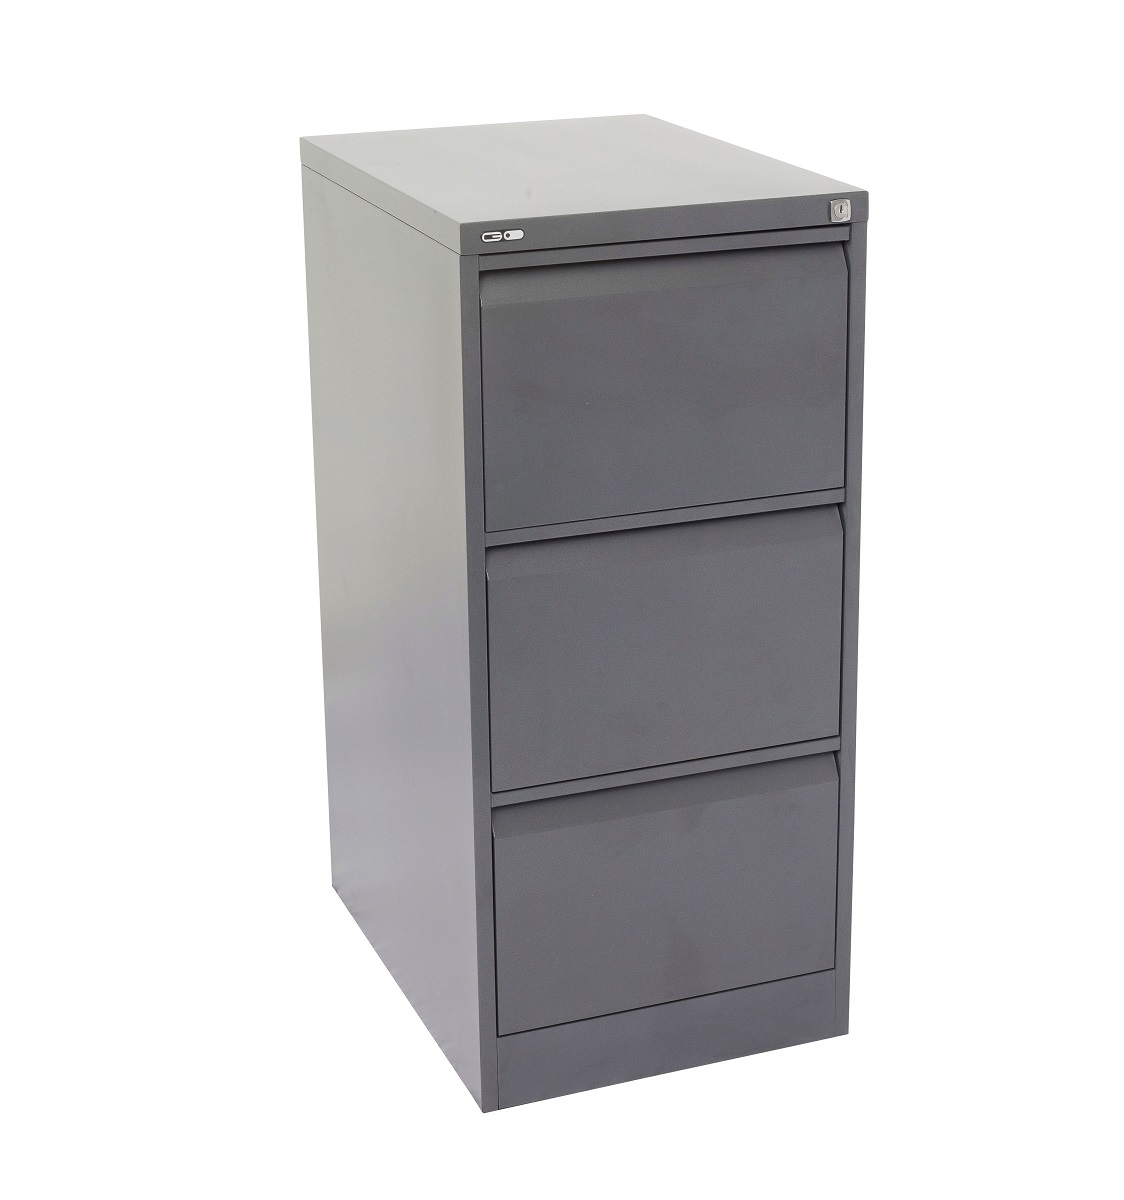 Go Vertical Filing Cabinets 3 drawers